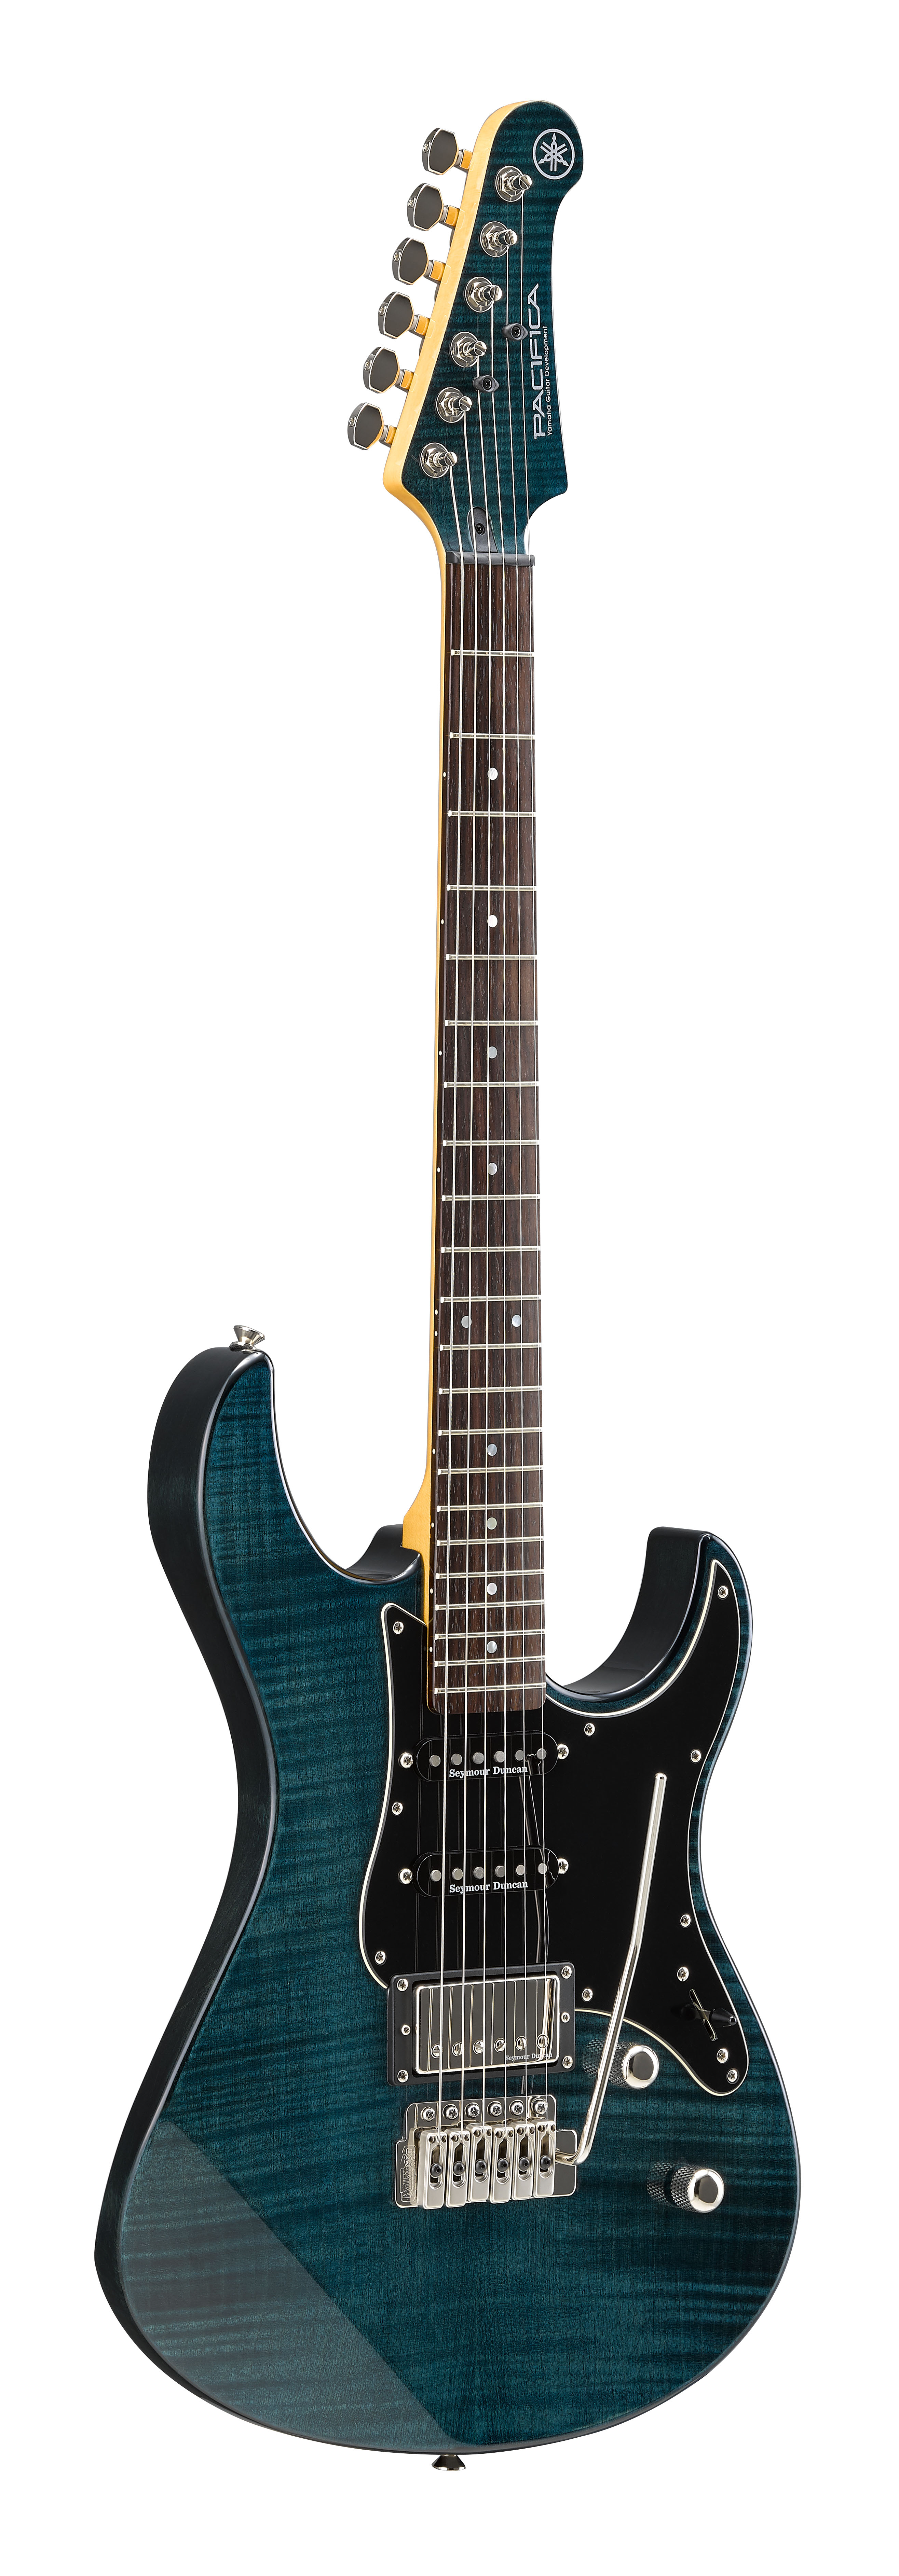 Yamaha Debuts Limited Run of Pacifica Electric Guitars with Bold Range ...